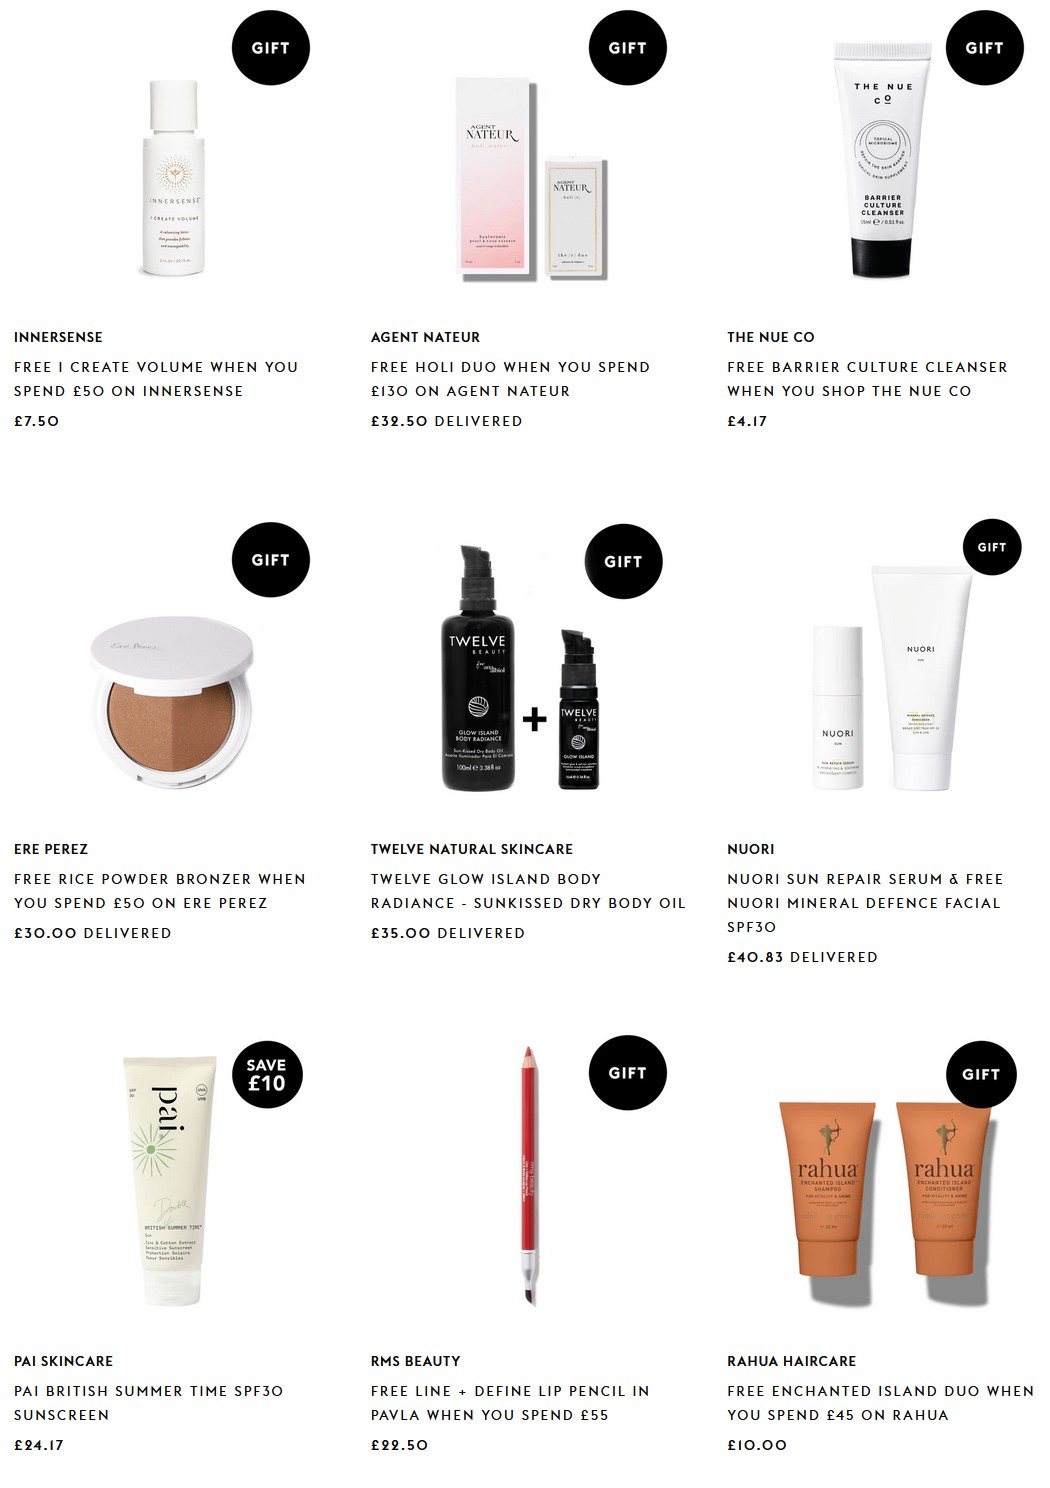 Gift with purchase offers at Content Beauty & Wellbeing